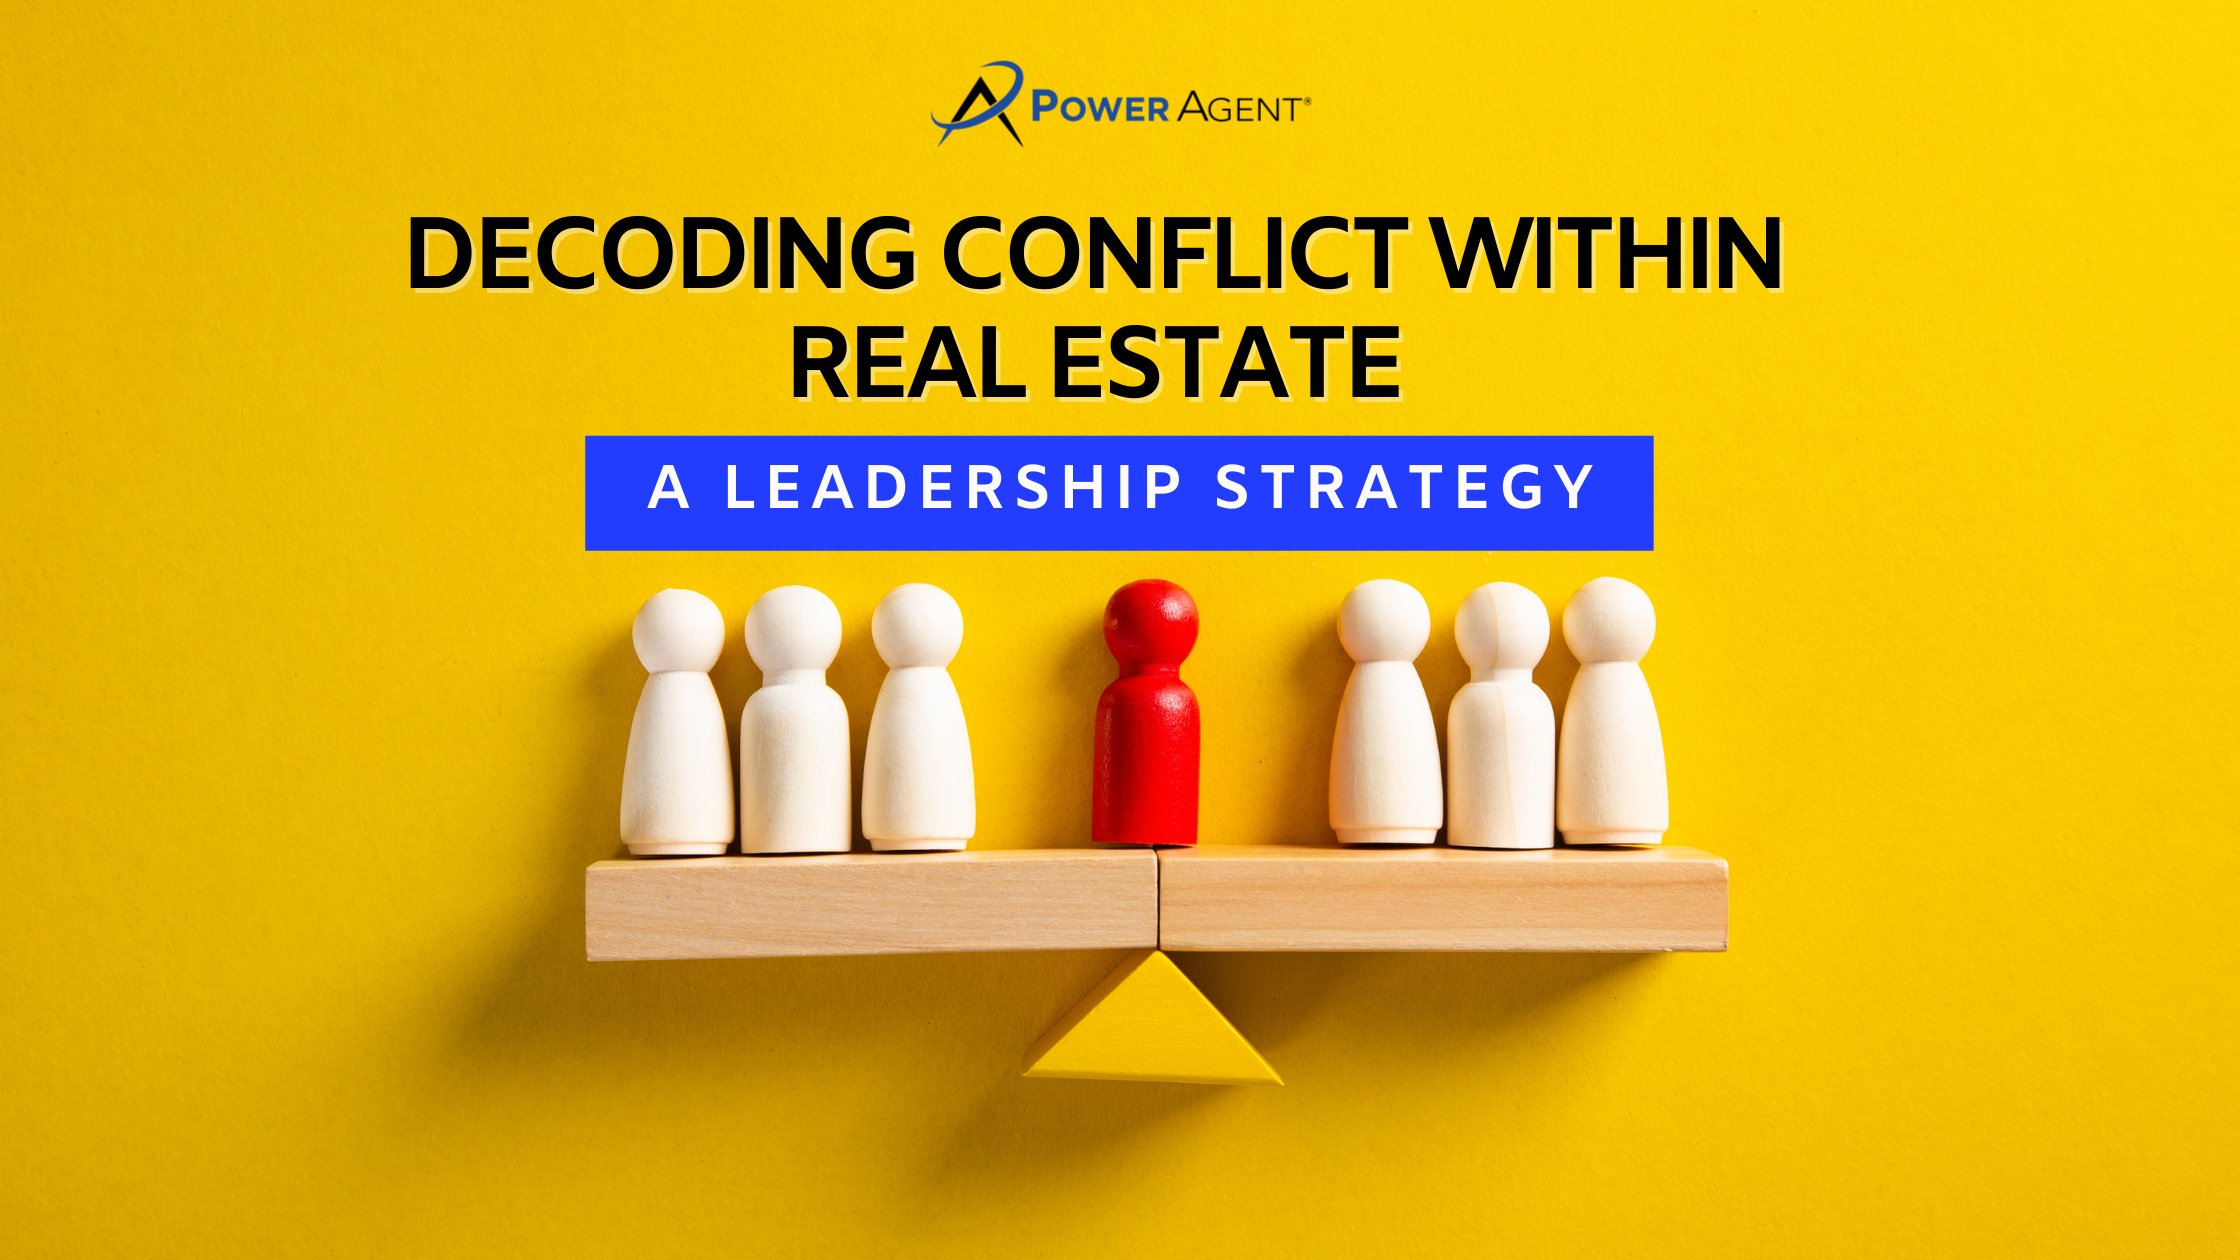 real estate leadership conflict resolution